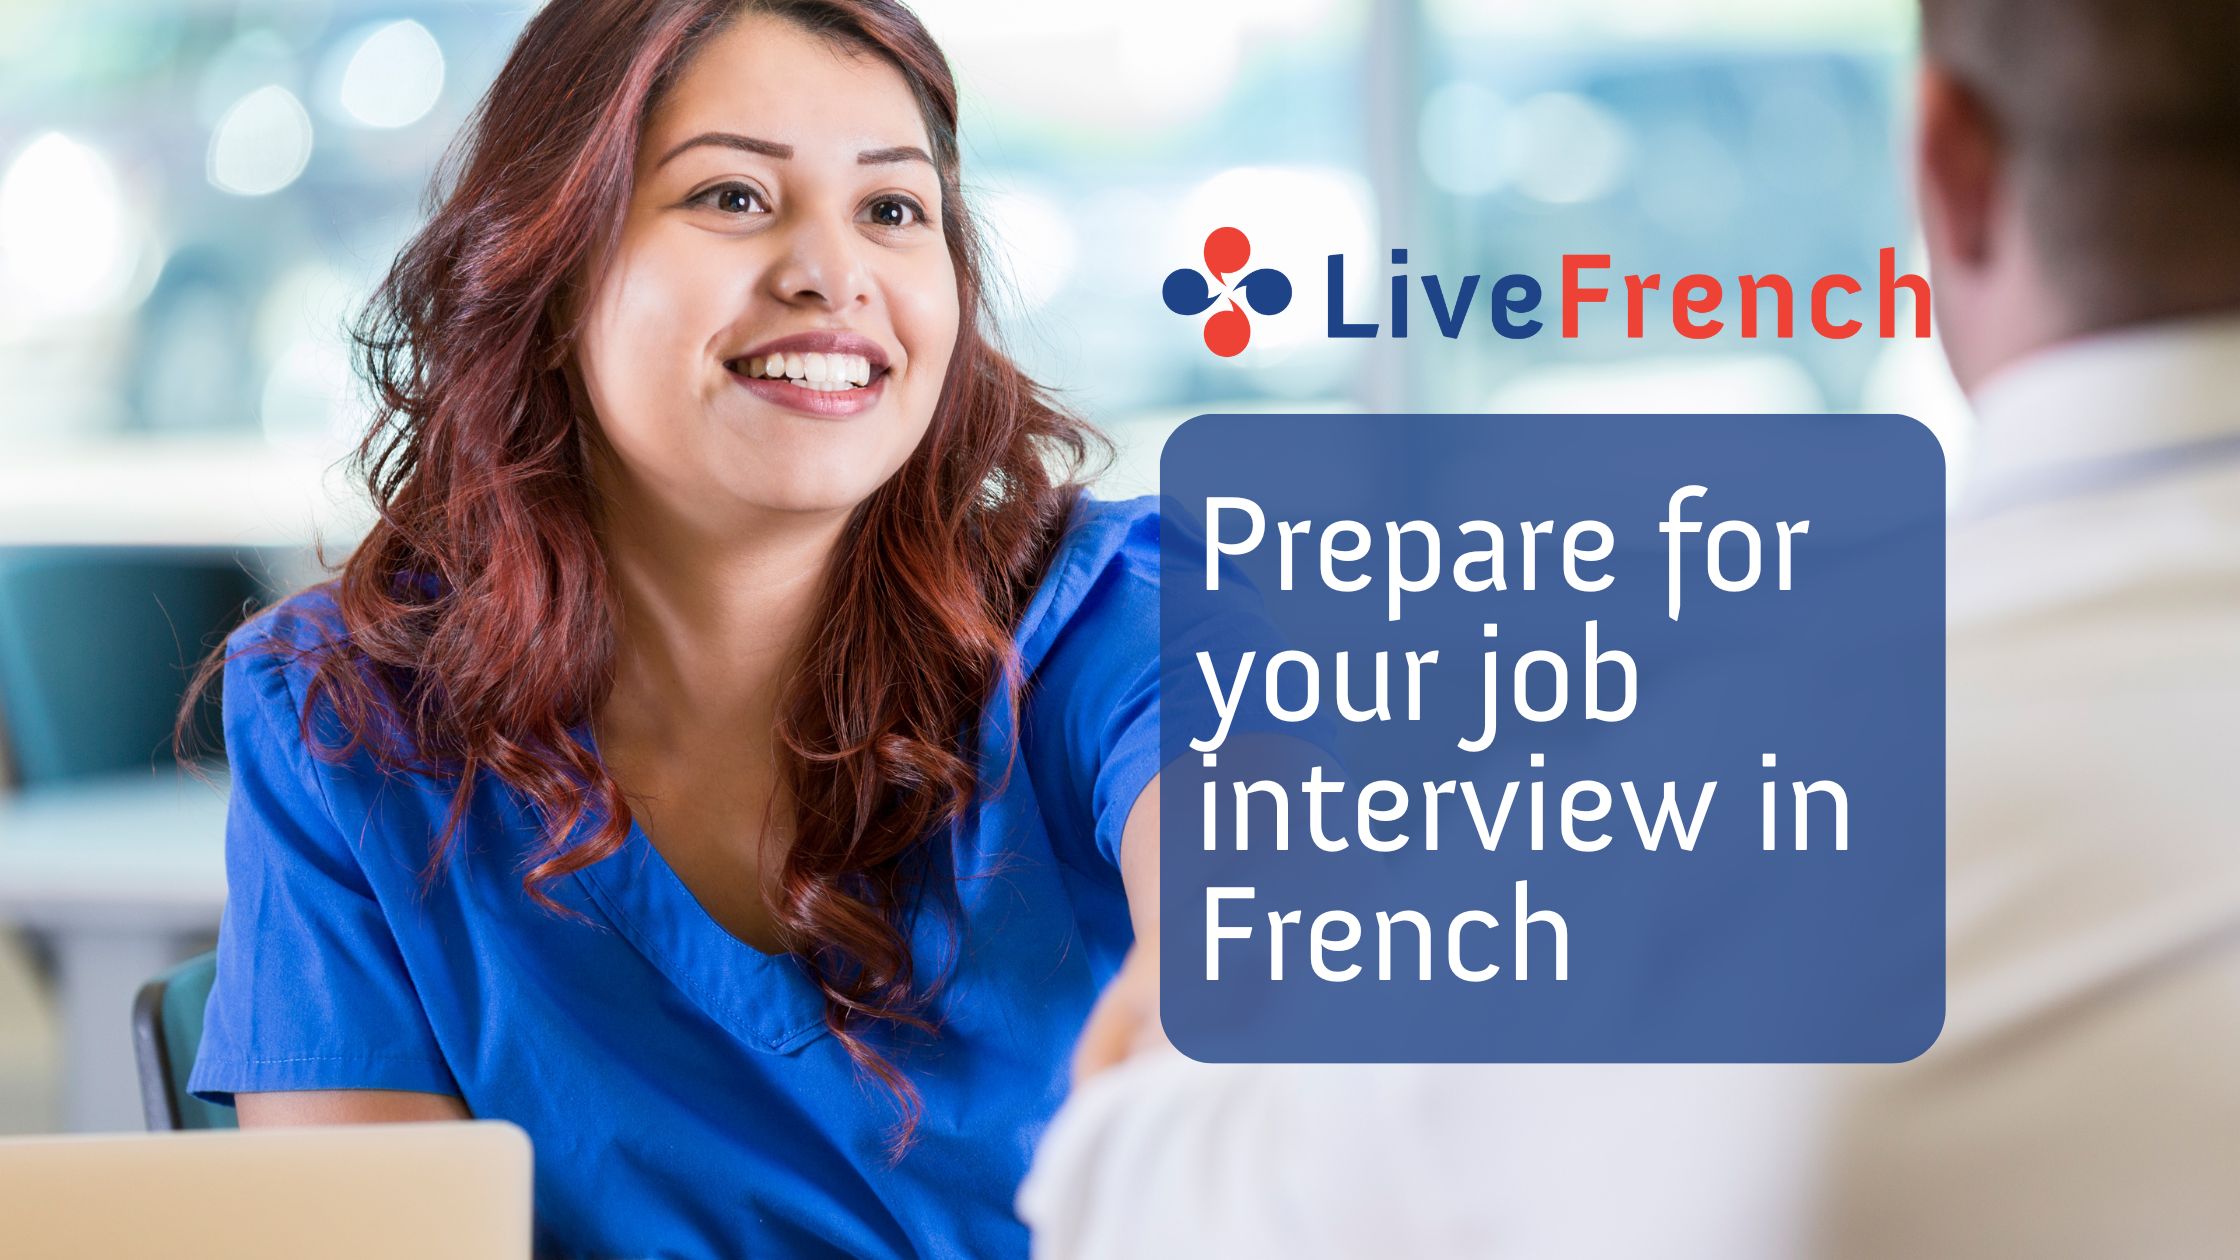 How to prepare for your job interview in French